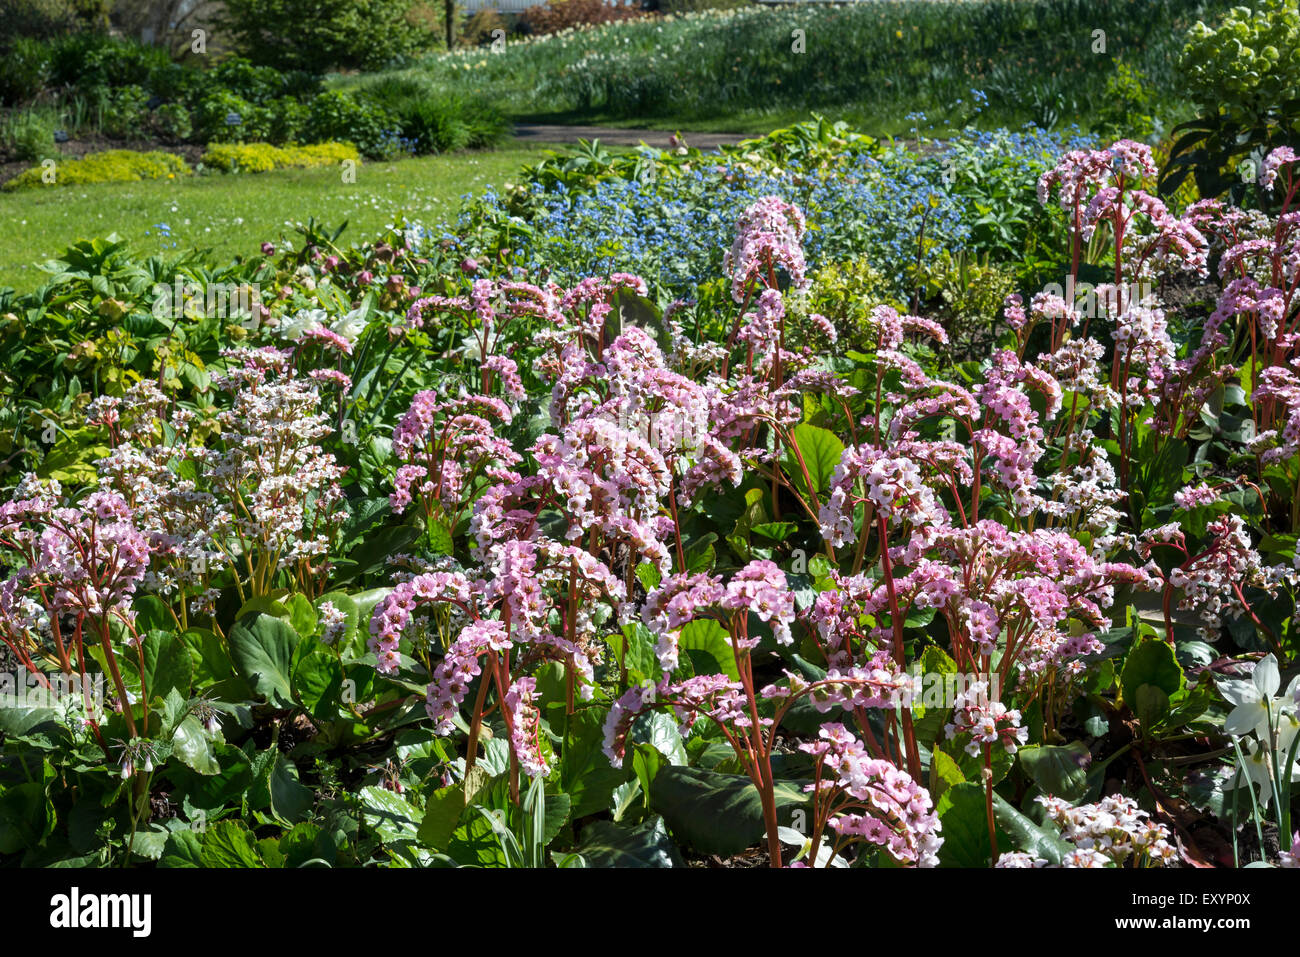 Bergenia Cordifolia with pale pink flowers in a spring garden. Stock Photo